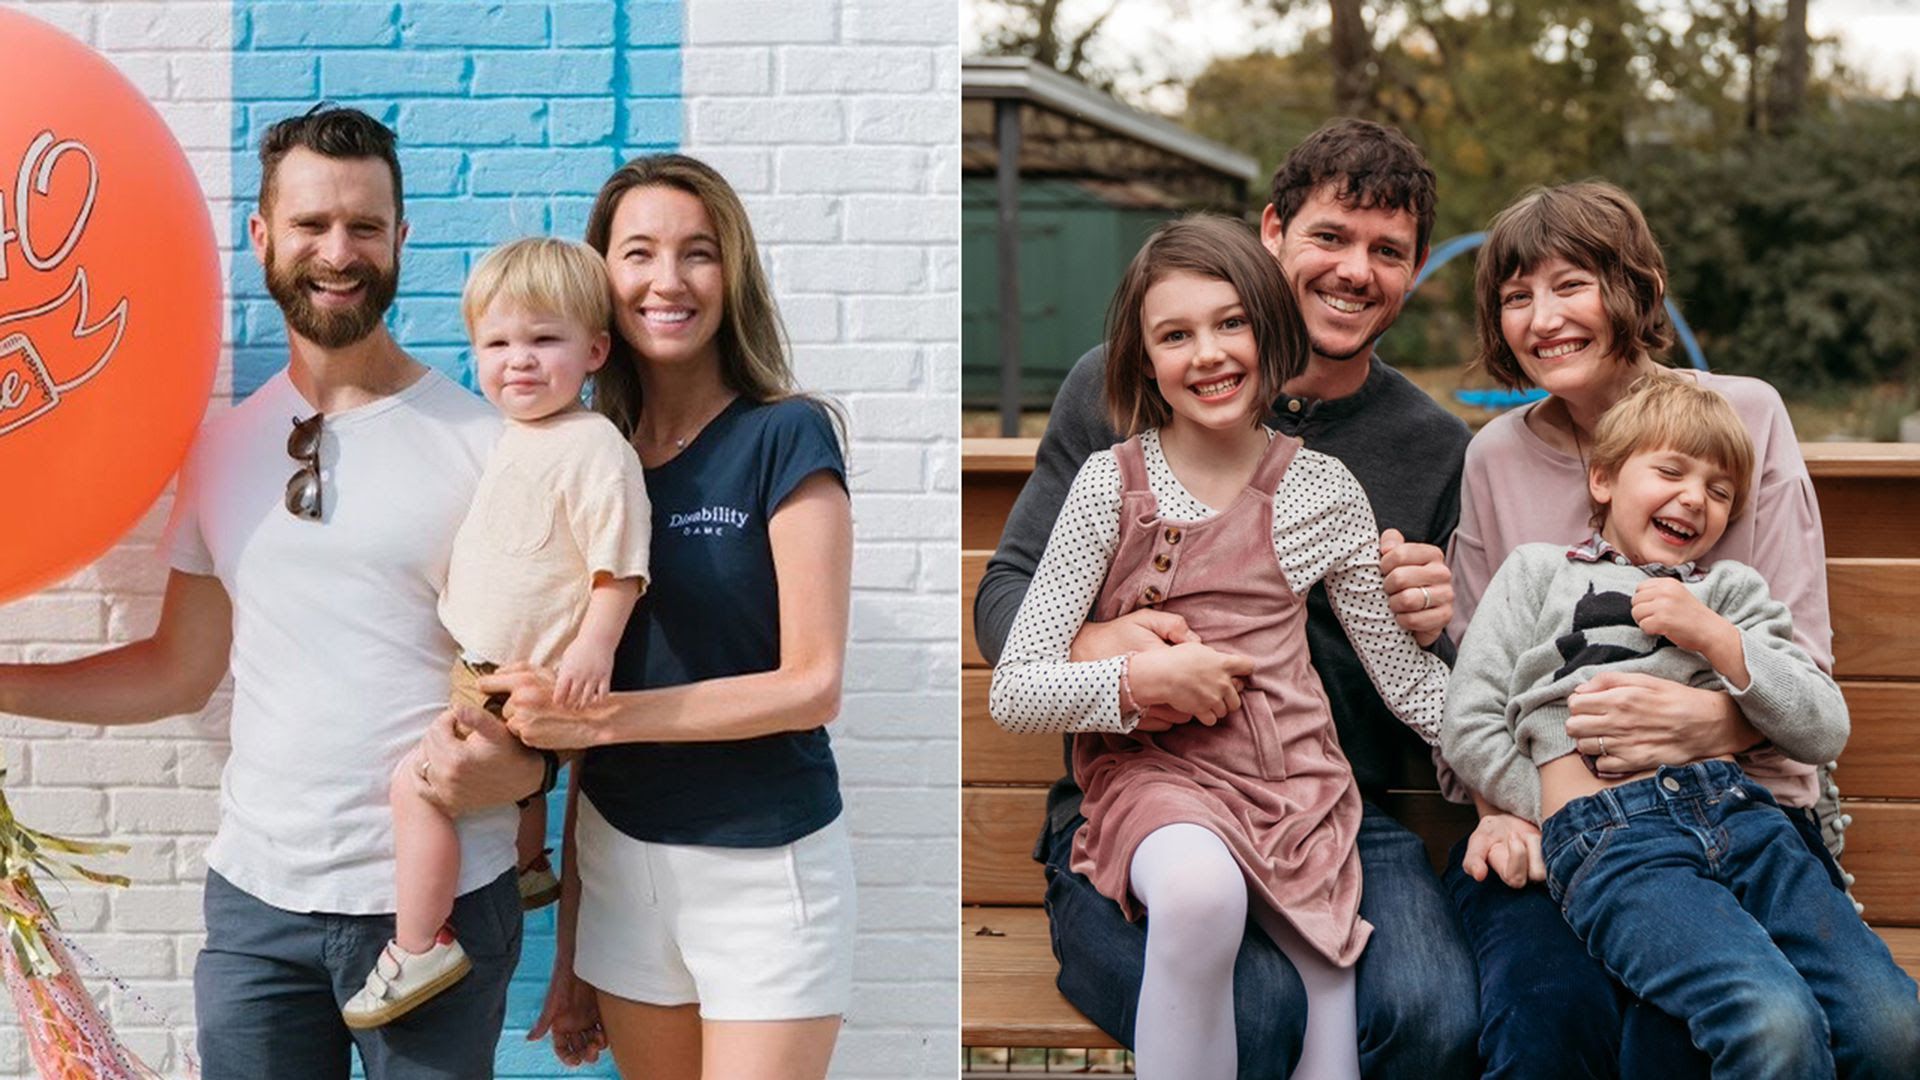 Two Nashville families fighting ALS. Left: Charlie Friedman, Allie Schmidt and their son Asher. Right: Eben Cathey, Evan Campa and their children Mae and Reuben.